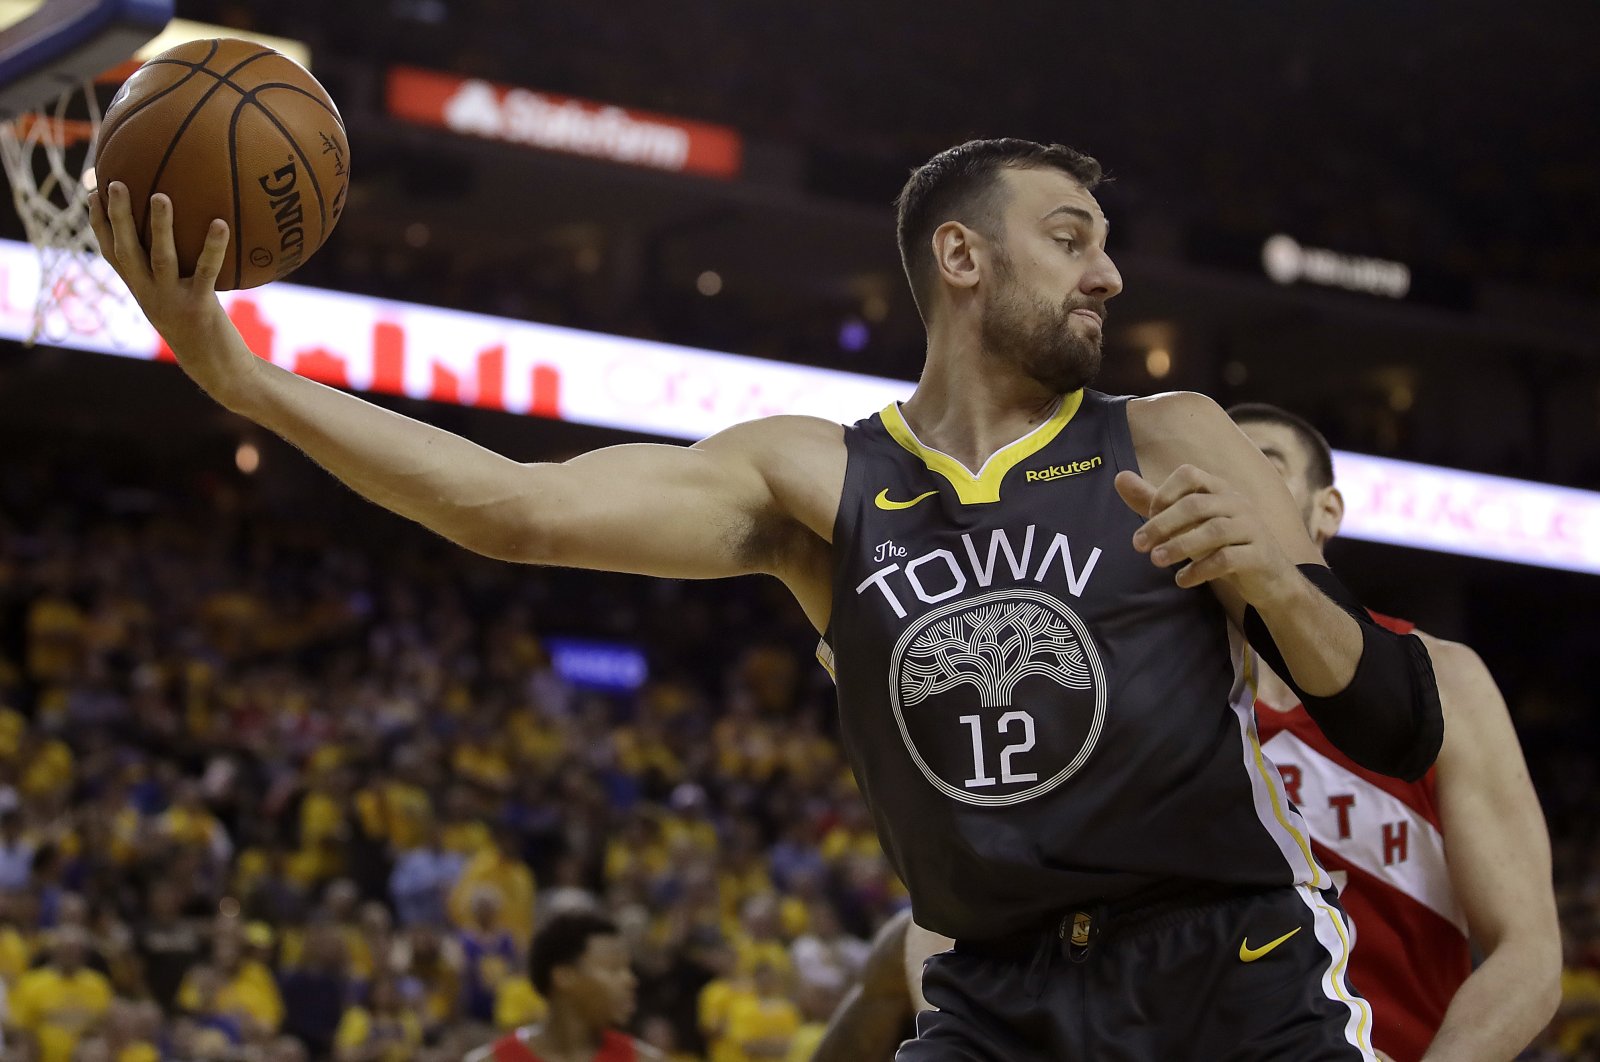 Golden State Warriors center Andrew Bogut plays against the Toronto Raptors during a game in Oakland, California, U.S., June 7, 2019. (AP PHOTO)